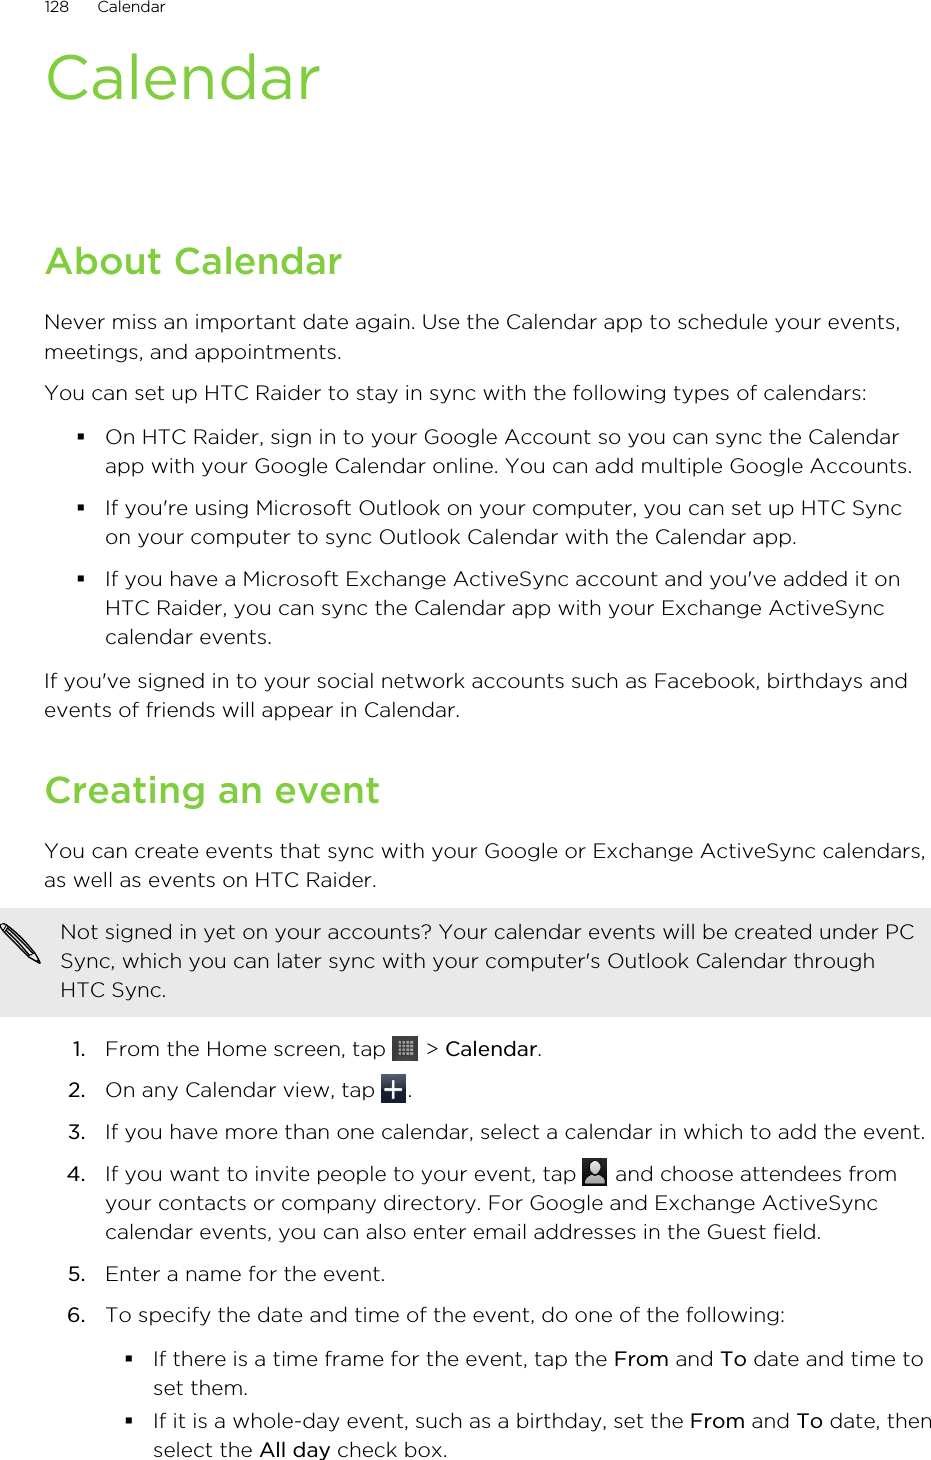 CalendarAbout CalendarNever miss an important date again. Use the Calendar app to schedule your events,meetings, and appointments.You can set up HTC Raider to stay in sync with the following types of calendars:§On HTC Raider, sign in to your Google Account so you can sync the Calendarapp with your Google Calendar online. You can add multiple Google Accounts.§If you&apos;re using Microsoft Outlook on your computer, you can set up HTC Syncon your computer to sync Outlook Calendar with the Calendar app.§If you have a Microsoft Exchange ActiveSync account and you&apos;ve added it onHTC Raider, you can sync the Calendar app with your Exchange ActiveSynccalendar events.If you&apos;ve signed in to your social network accounts such as Facebook, birthdays andevents of friends will appear in Calendar.Creating an eventYou can create events that sync with your Google or Exchange ActiveSync calendars,as well as events on HTC Raider.Not signed in yet on your accounts? Your calendar events will be created under PCSync, which you can later sync with your computer&apos;s Outlook Calendar throughHTC Sync.1. From the Home screen, tap   &gt; Calendar.2. On any Calendar view, tap  .3. If you have more than one calendar, select a calendar in which to add the event.4. If you want to invite people to your event, tap   and choose attendees fromyour contacts or company directory. For Google and Exchange ActiveSynccalendar events, you can also enter email addresses in the Guest field.5. Enter a name for the event.6. To specify the date and time of the event, do one of the following:§If there is a time frame for the event, tap the From and To date and time toset them.§If it is a whole-day event, such as a birthday, set the From and To date, thenselect the All day check box.128 Calendar